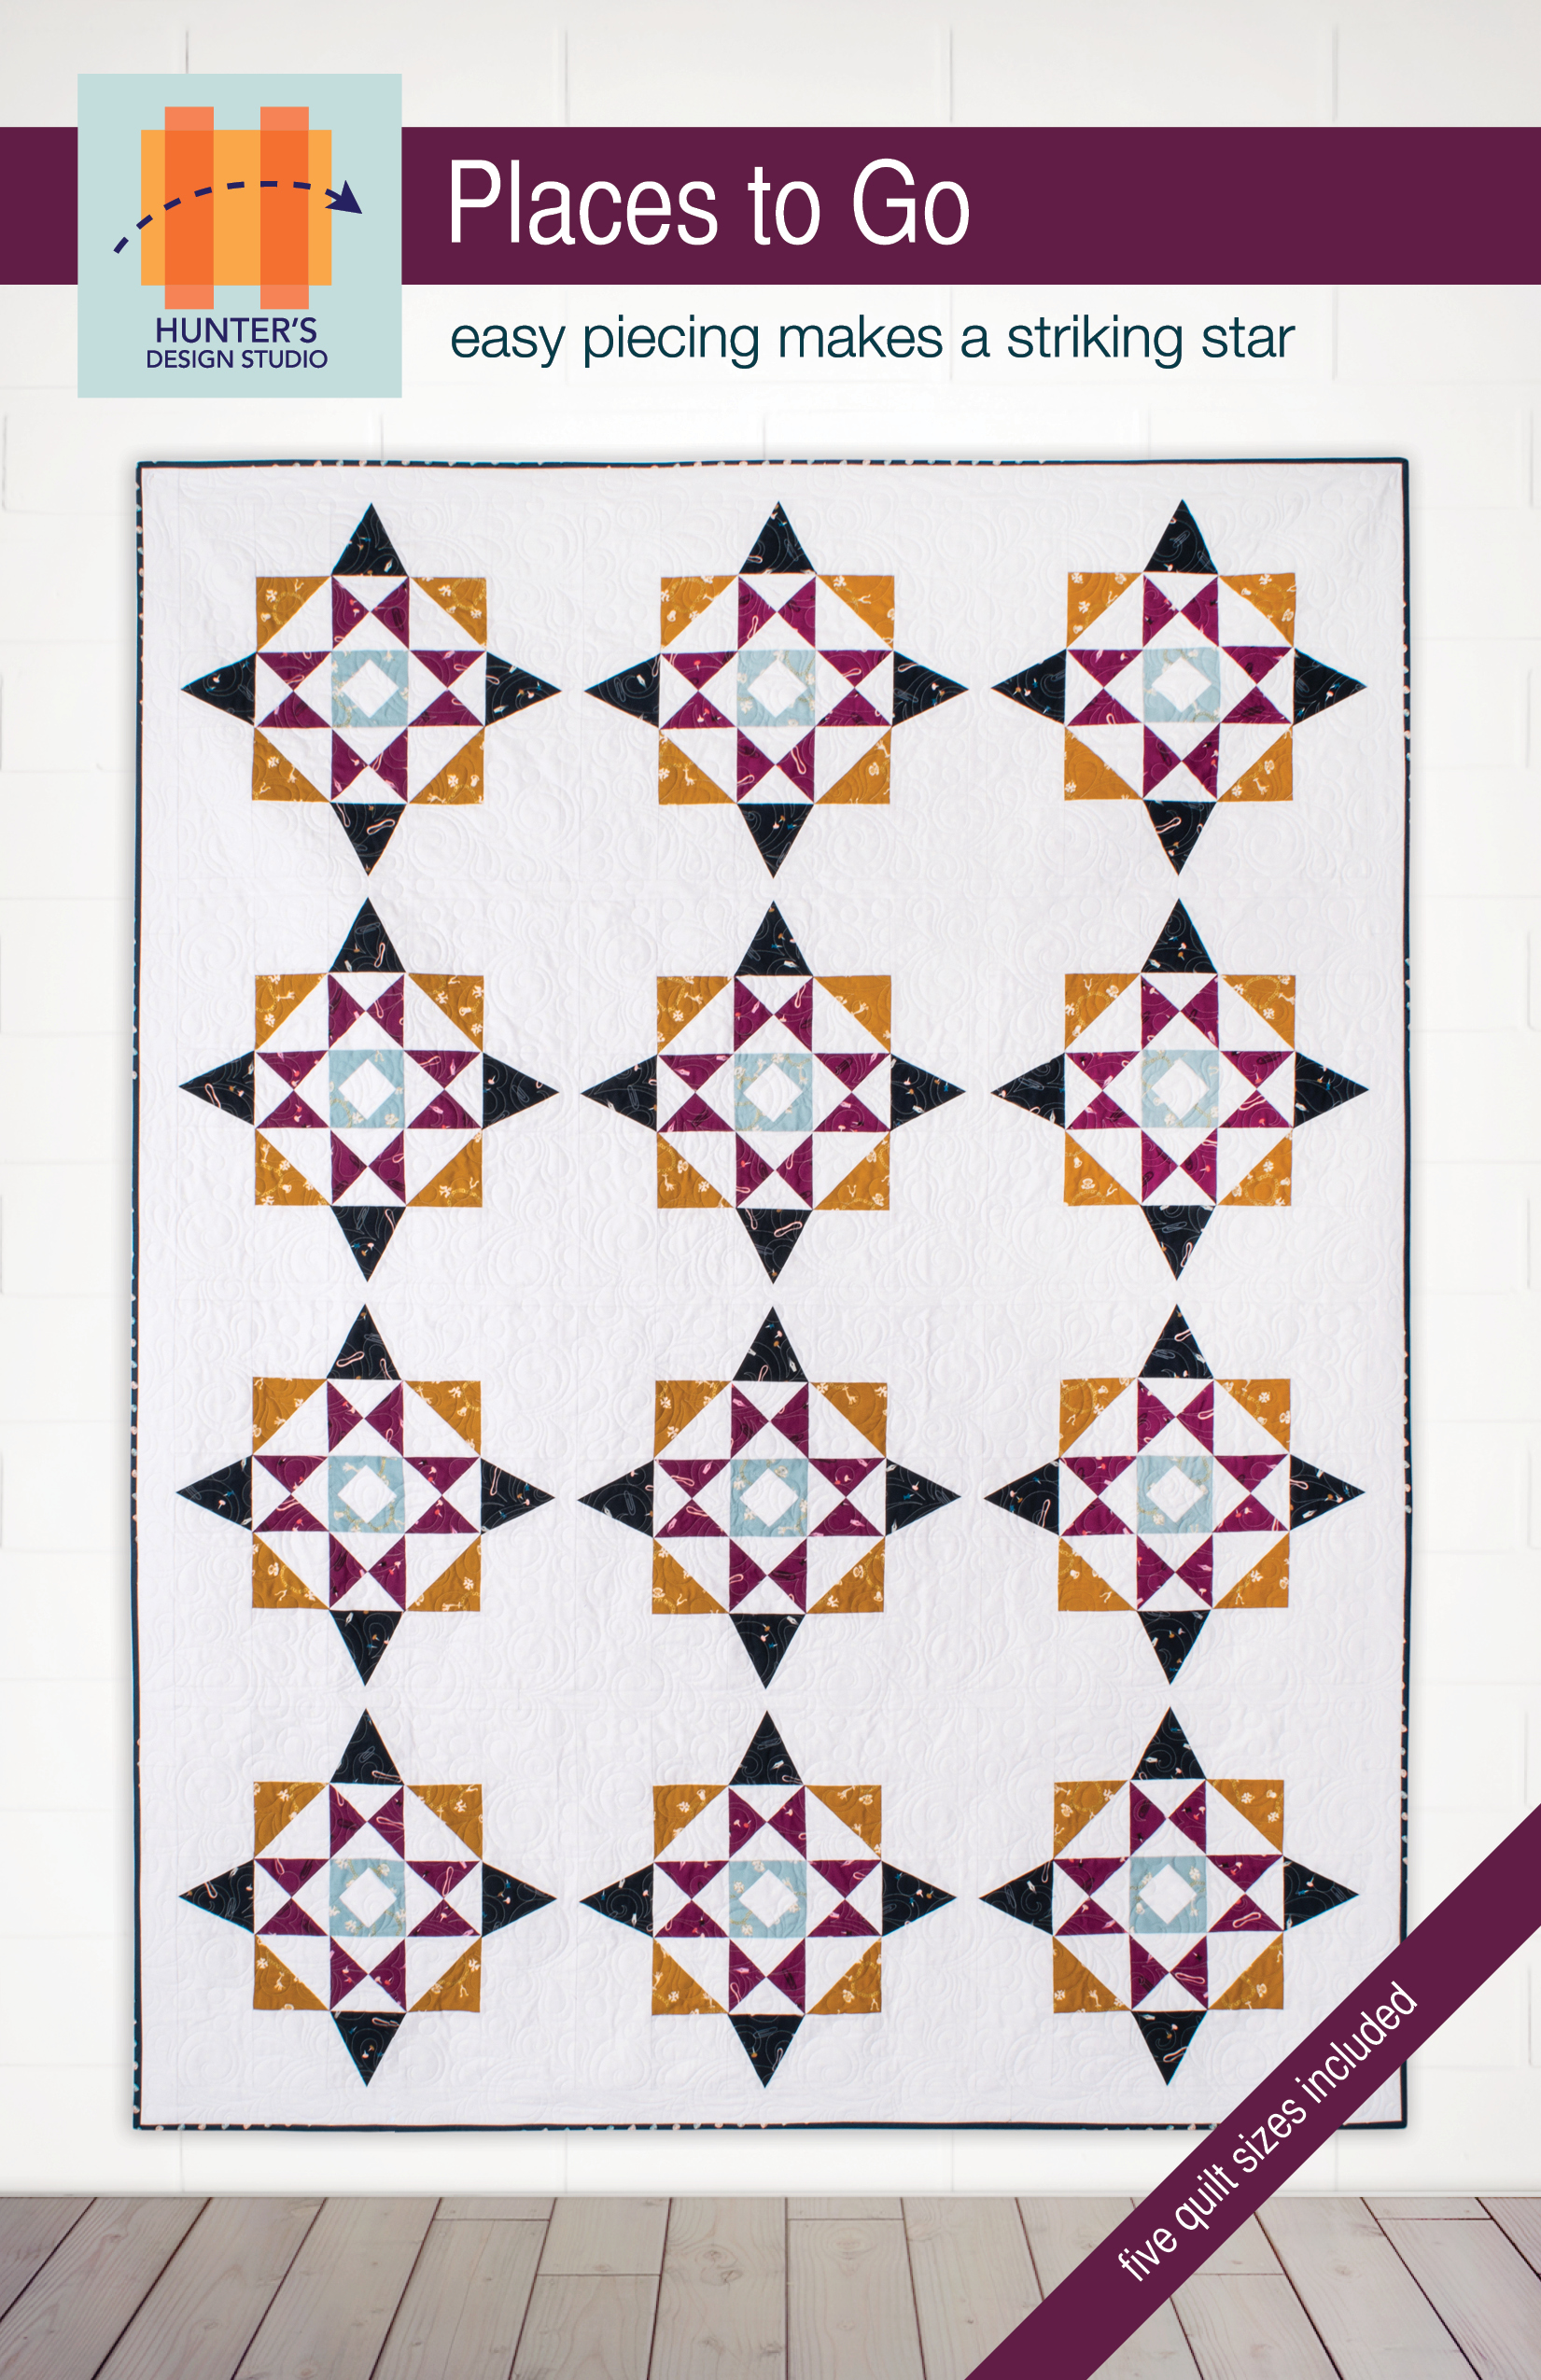 Places to Go is a multi-sized quilt pattern that features repeating stars, built from classic components like half square triangles, and quarter square triangles.